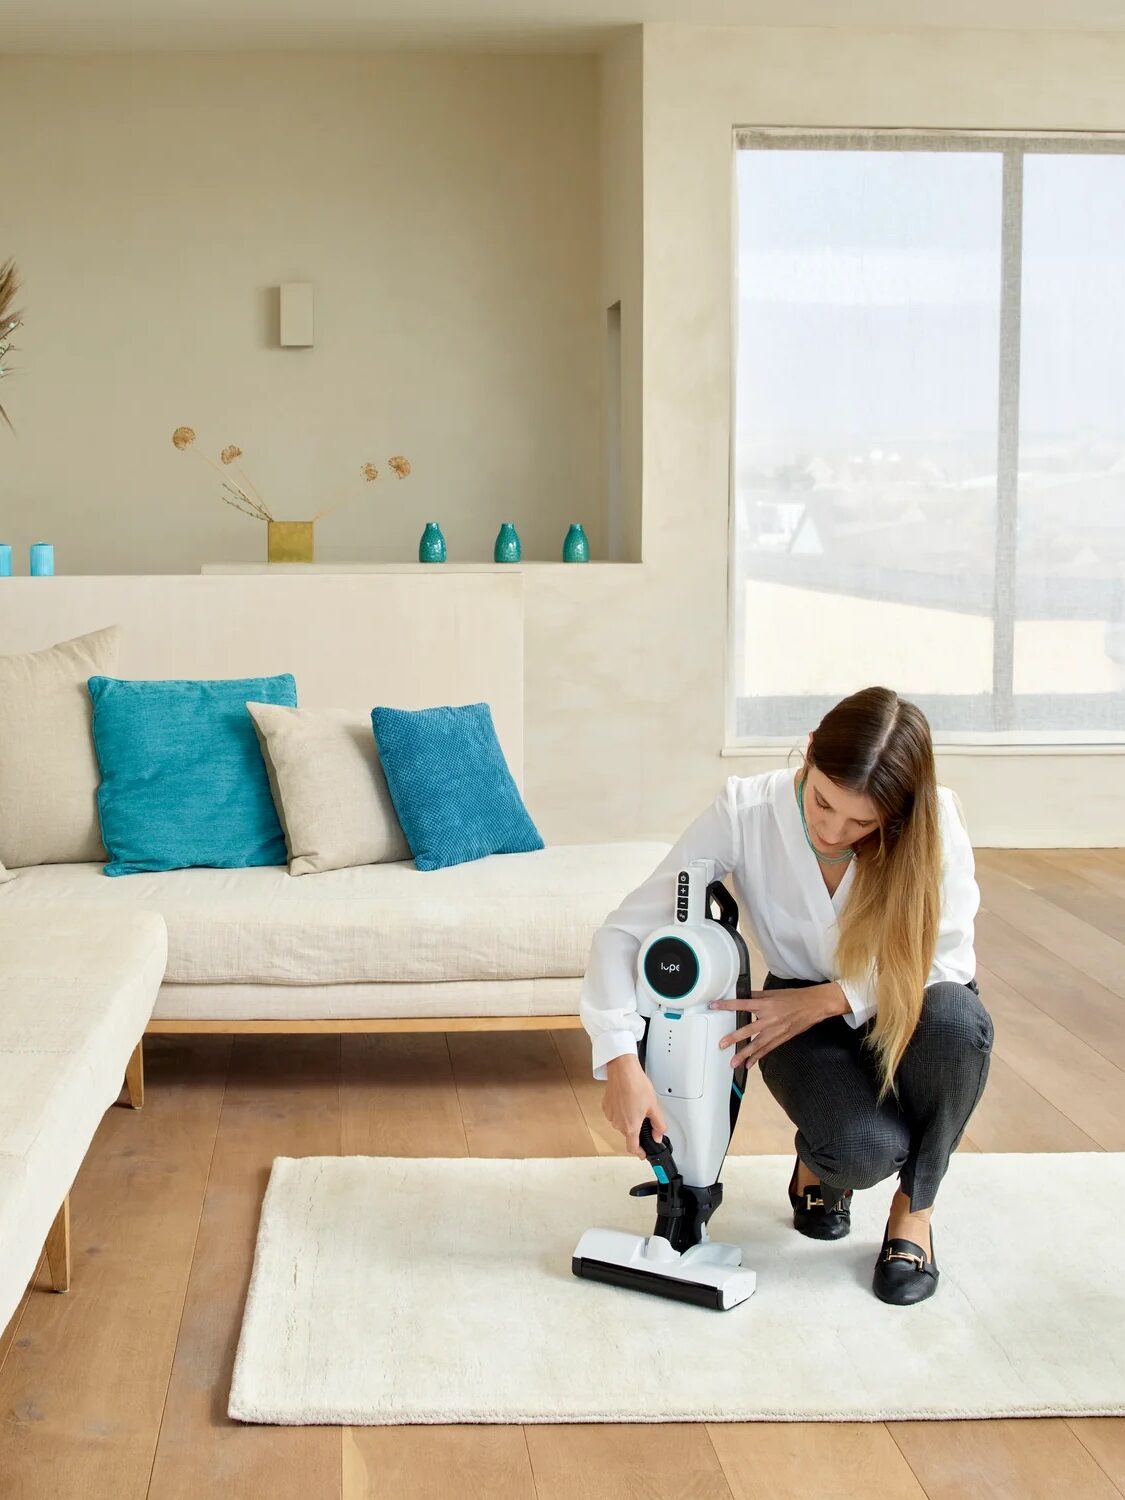 Woman setting up a robotic vacuum cleaner in a bright living room.